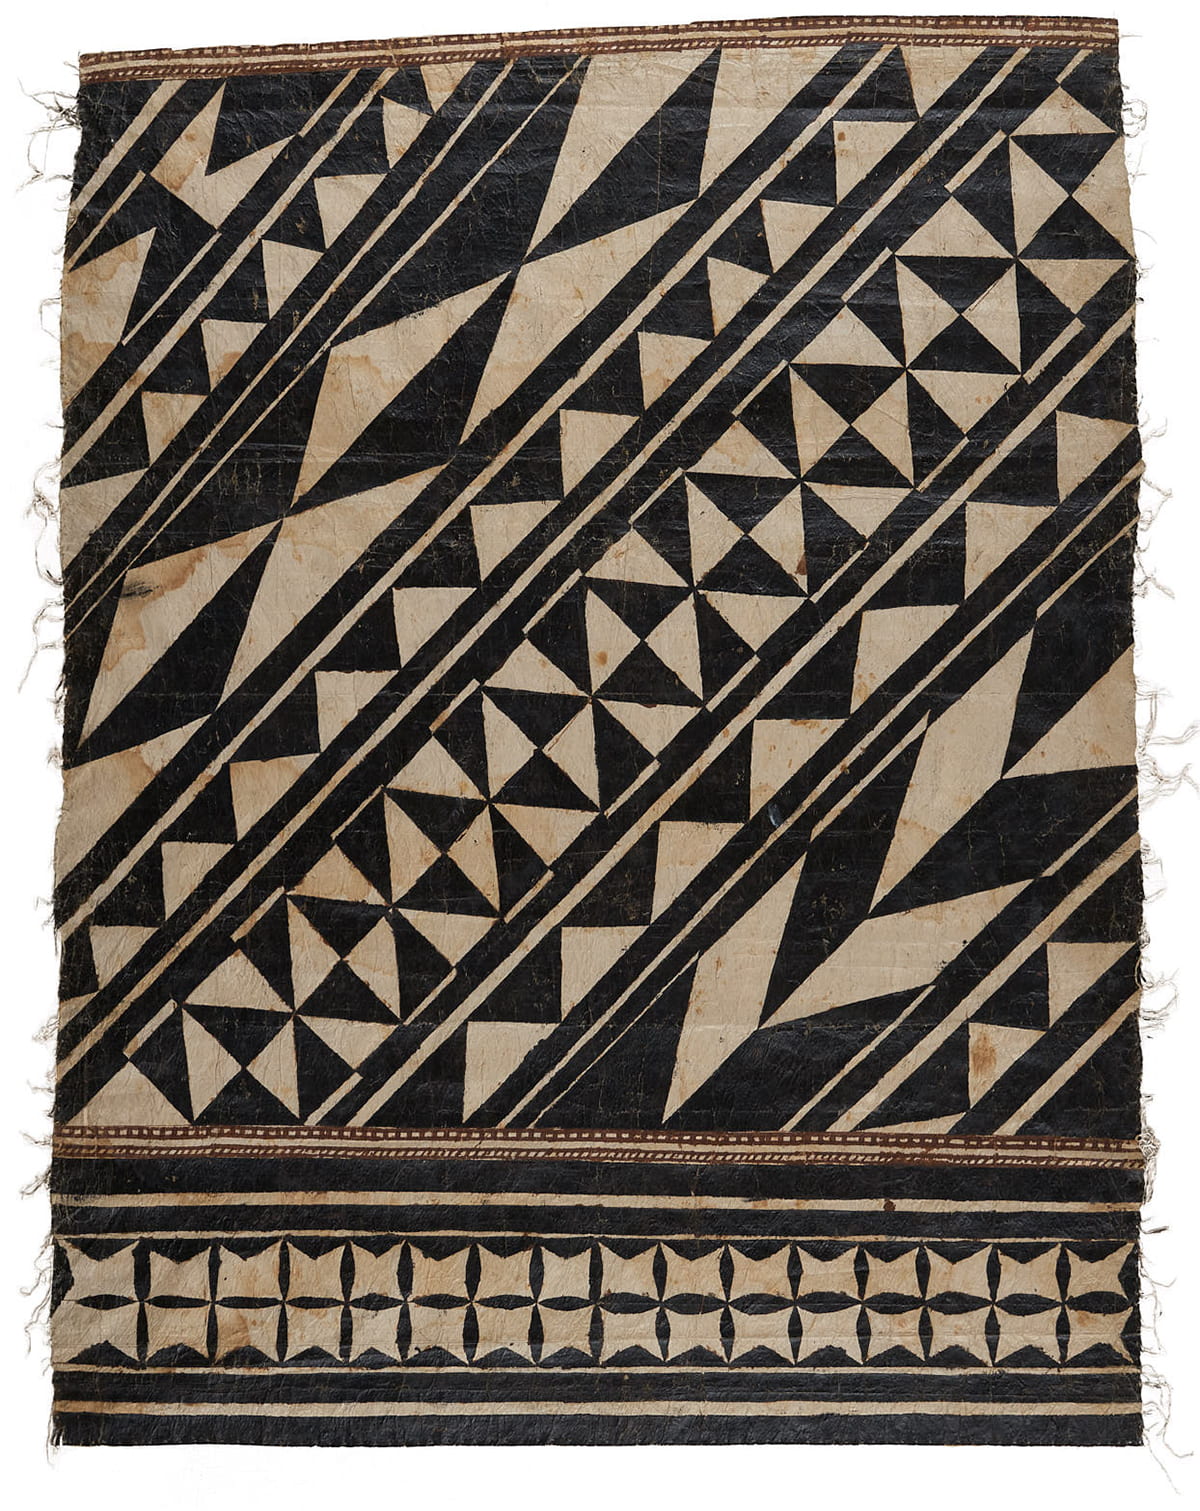 Rectangular cloth with geometric patterning in black and off-white